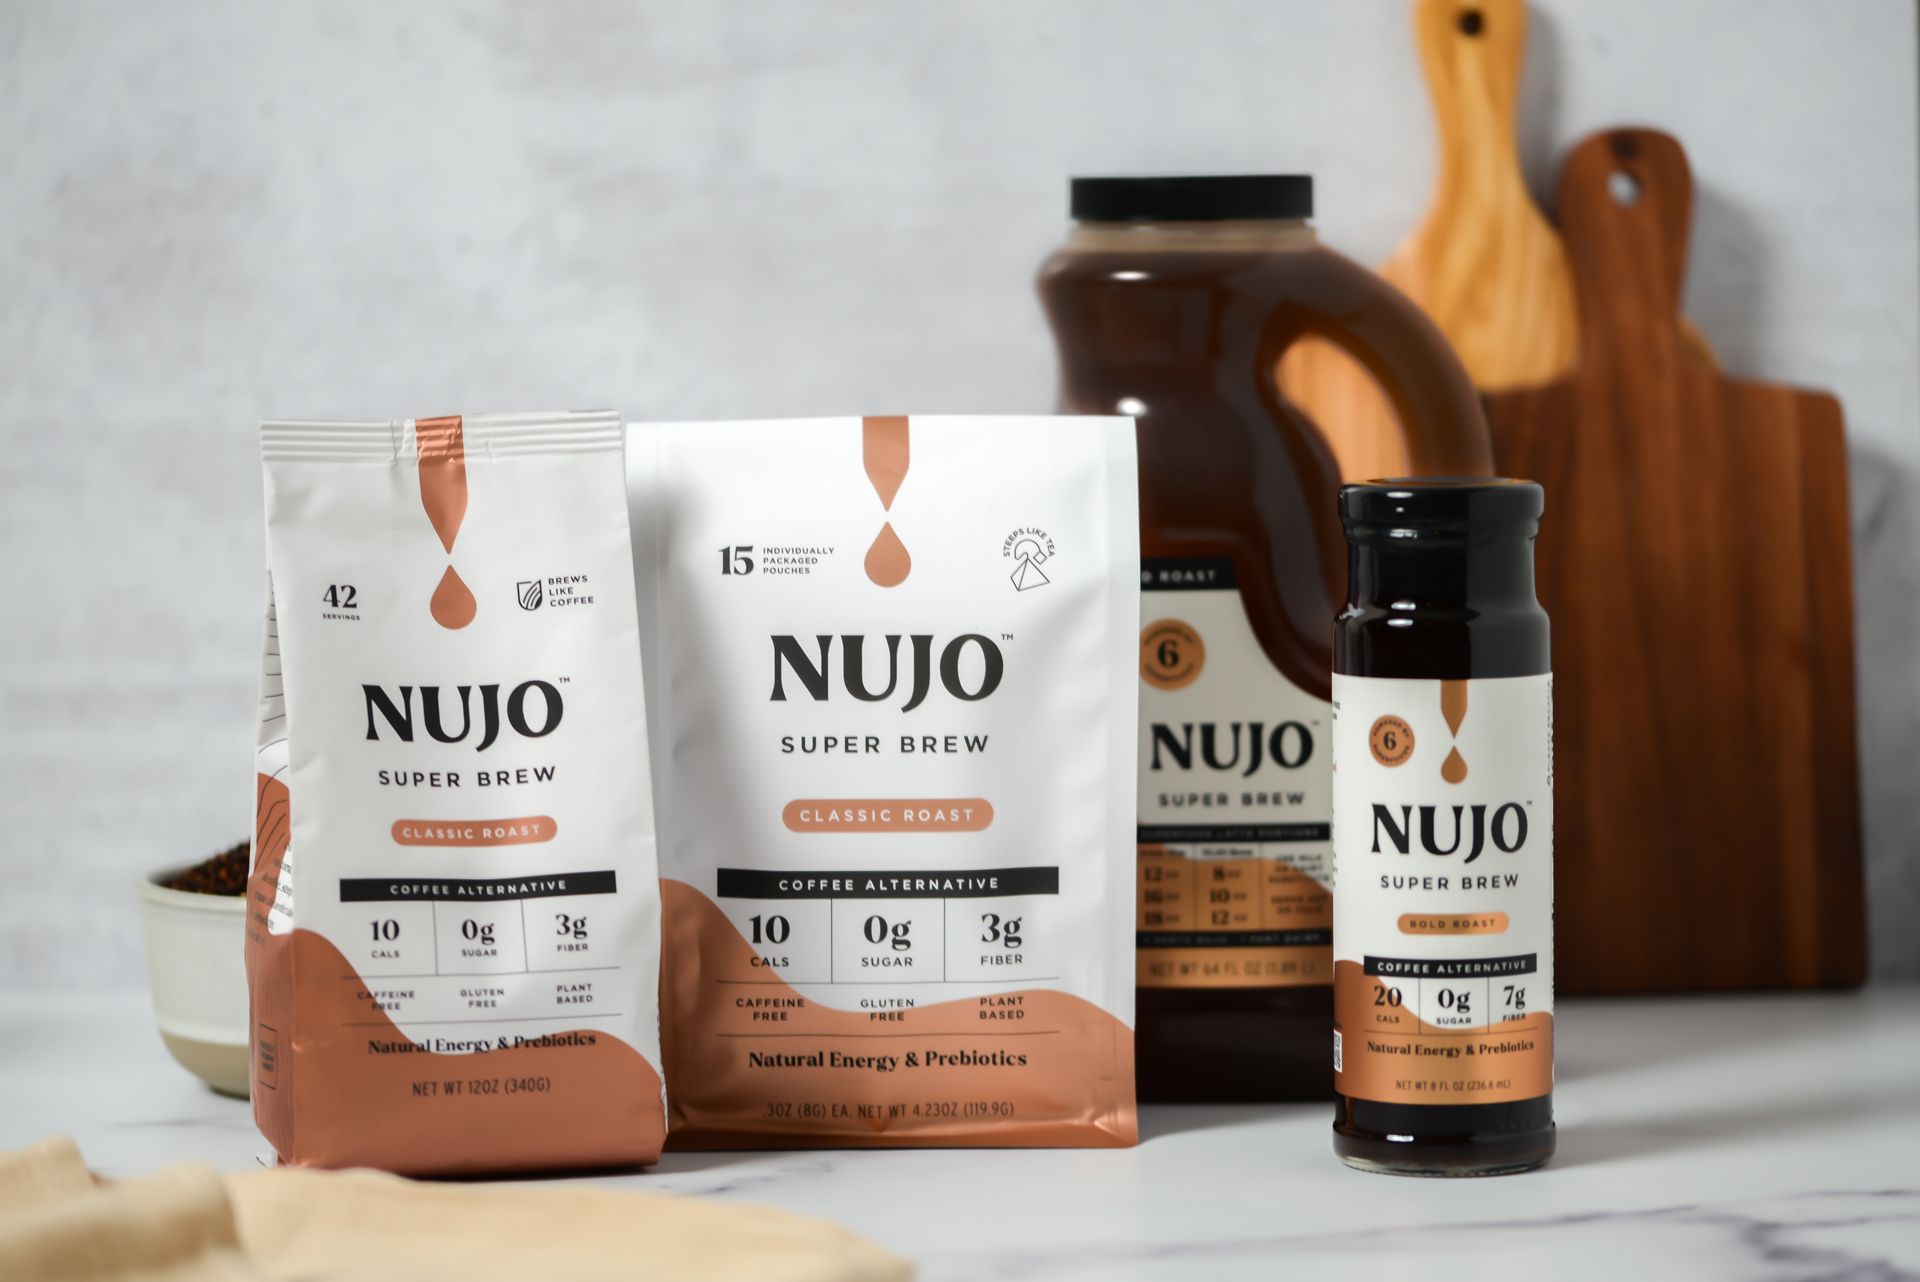 All NUJO product packaging